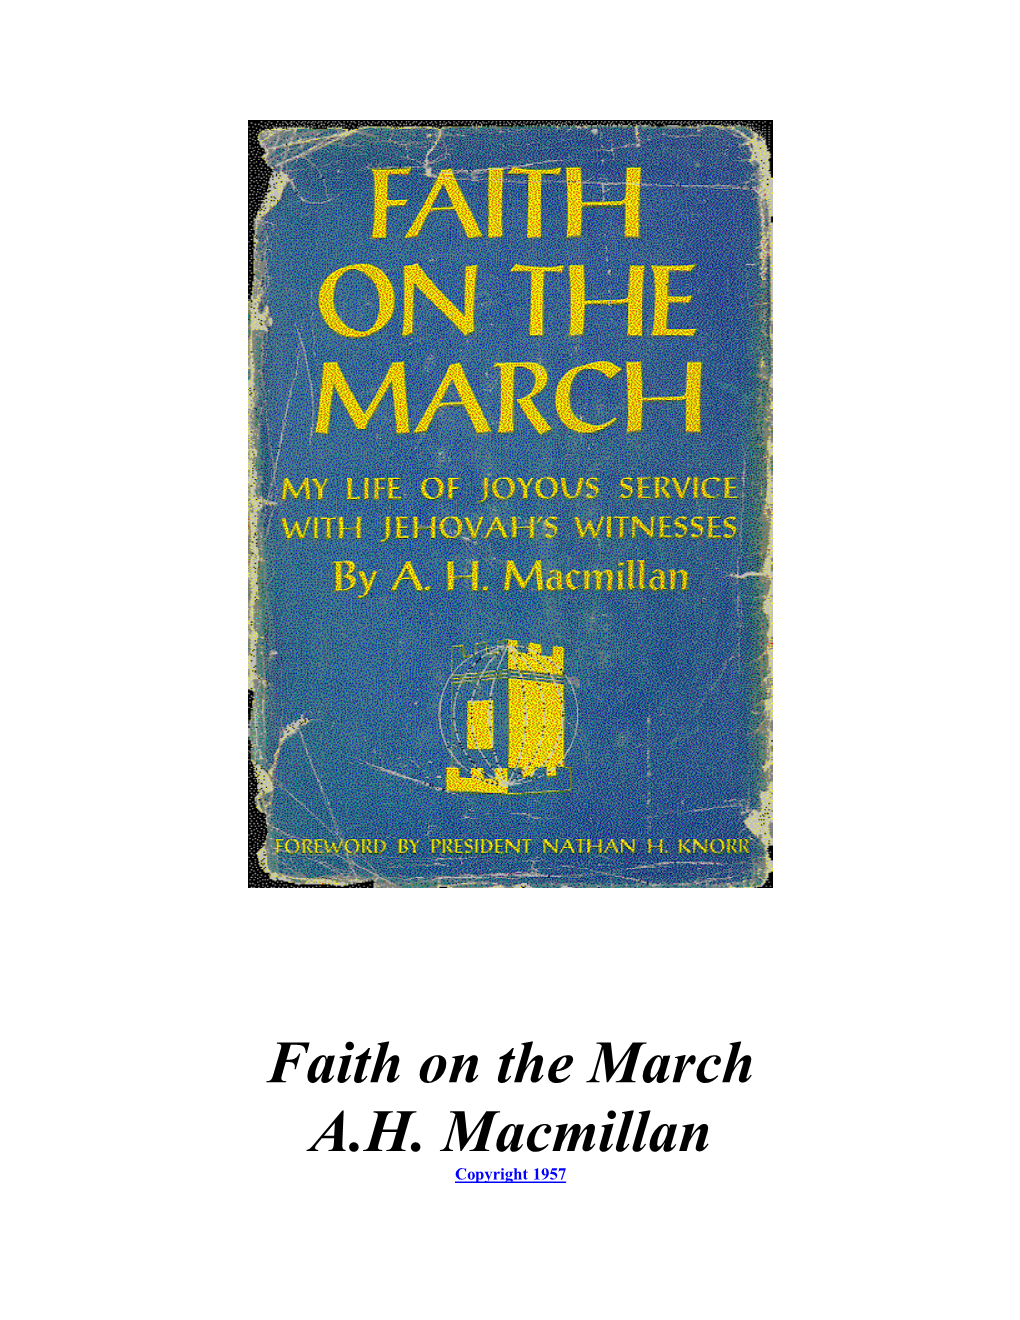 Faith on the March A.H. Macmillan Copyright 1957 PART ONE